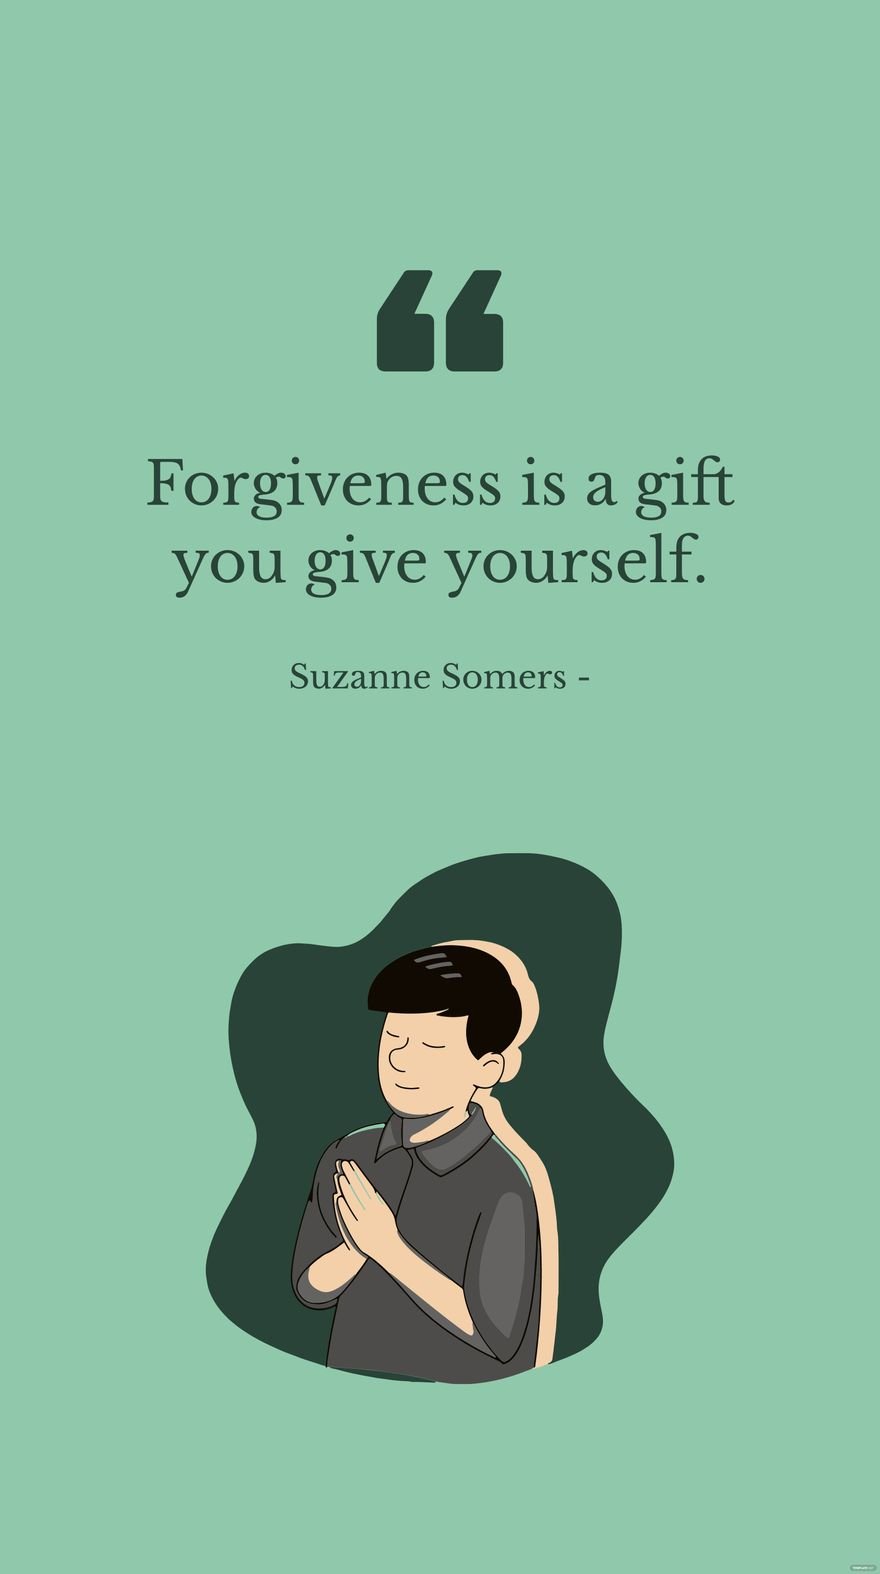 Free Suzanne Somers - Forgiveness is a gift you give yourself. in JPG